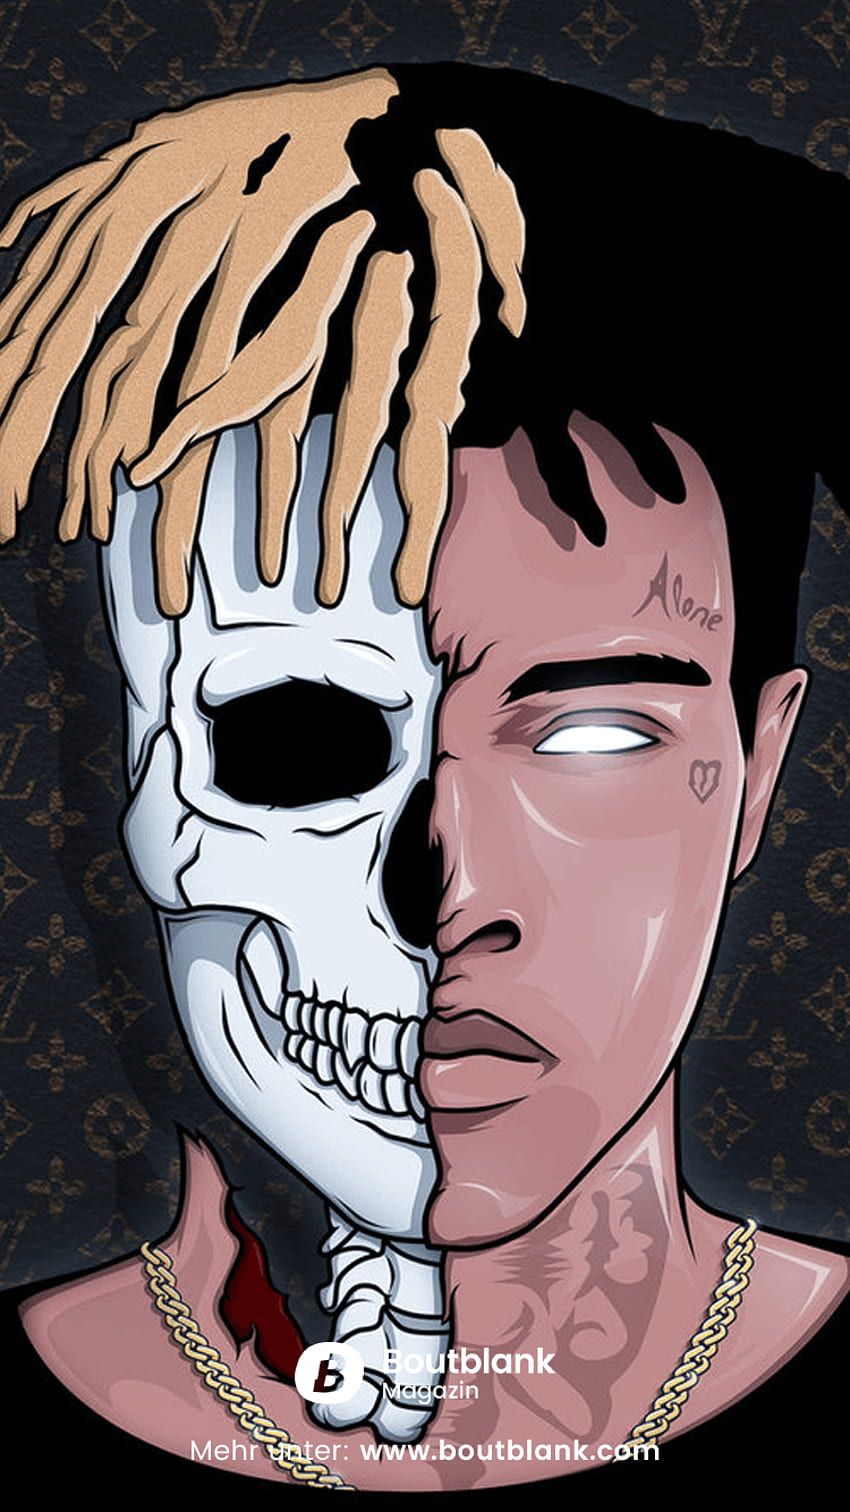 IPhone wallpaper of Juice Wrld with a skeleton face and Louis Vuitton background - XXXTentacion